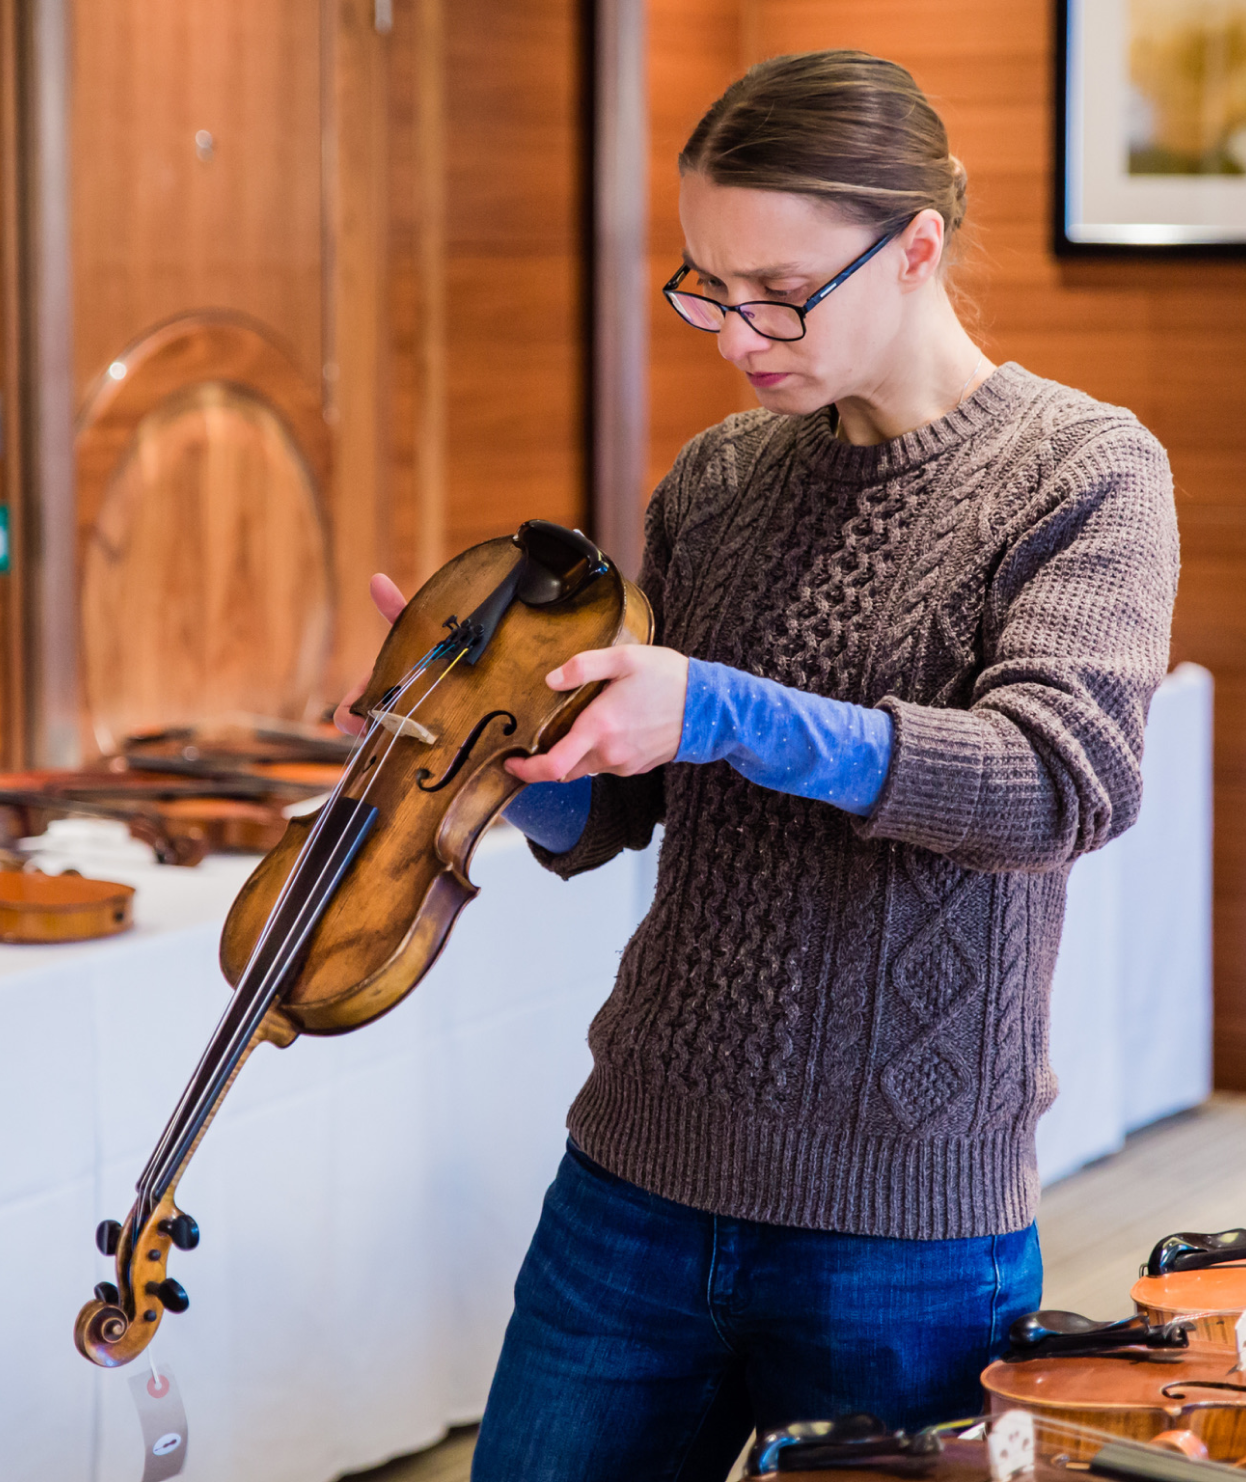 Amati sells violins, violas, cellos and bows for every budget and level of skill.